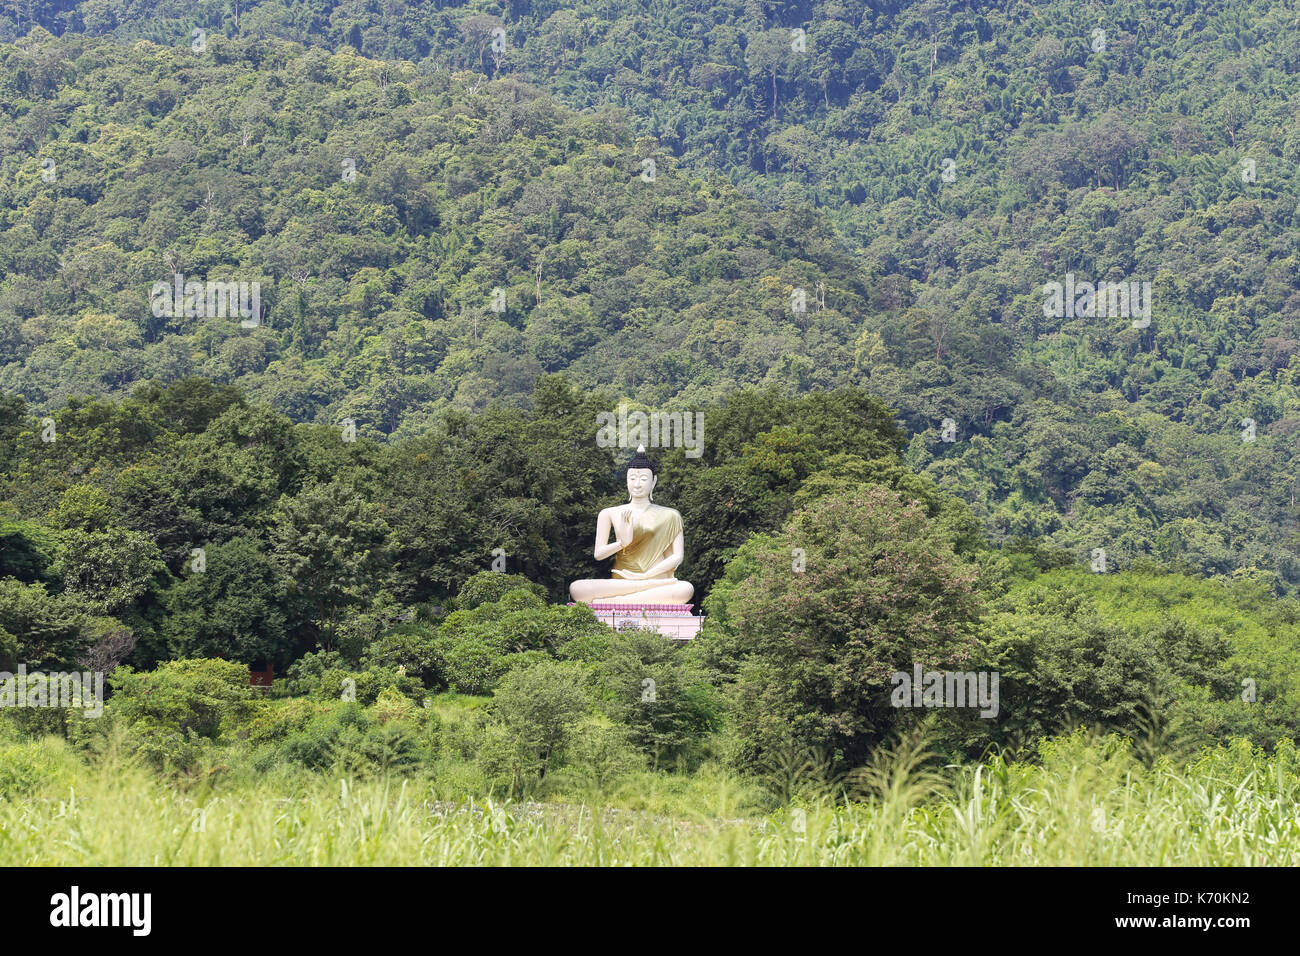 Big buddha statue on the mountain,Symbol of Buddhism in Thailand. Stock Photo